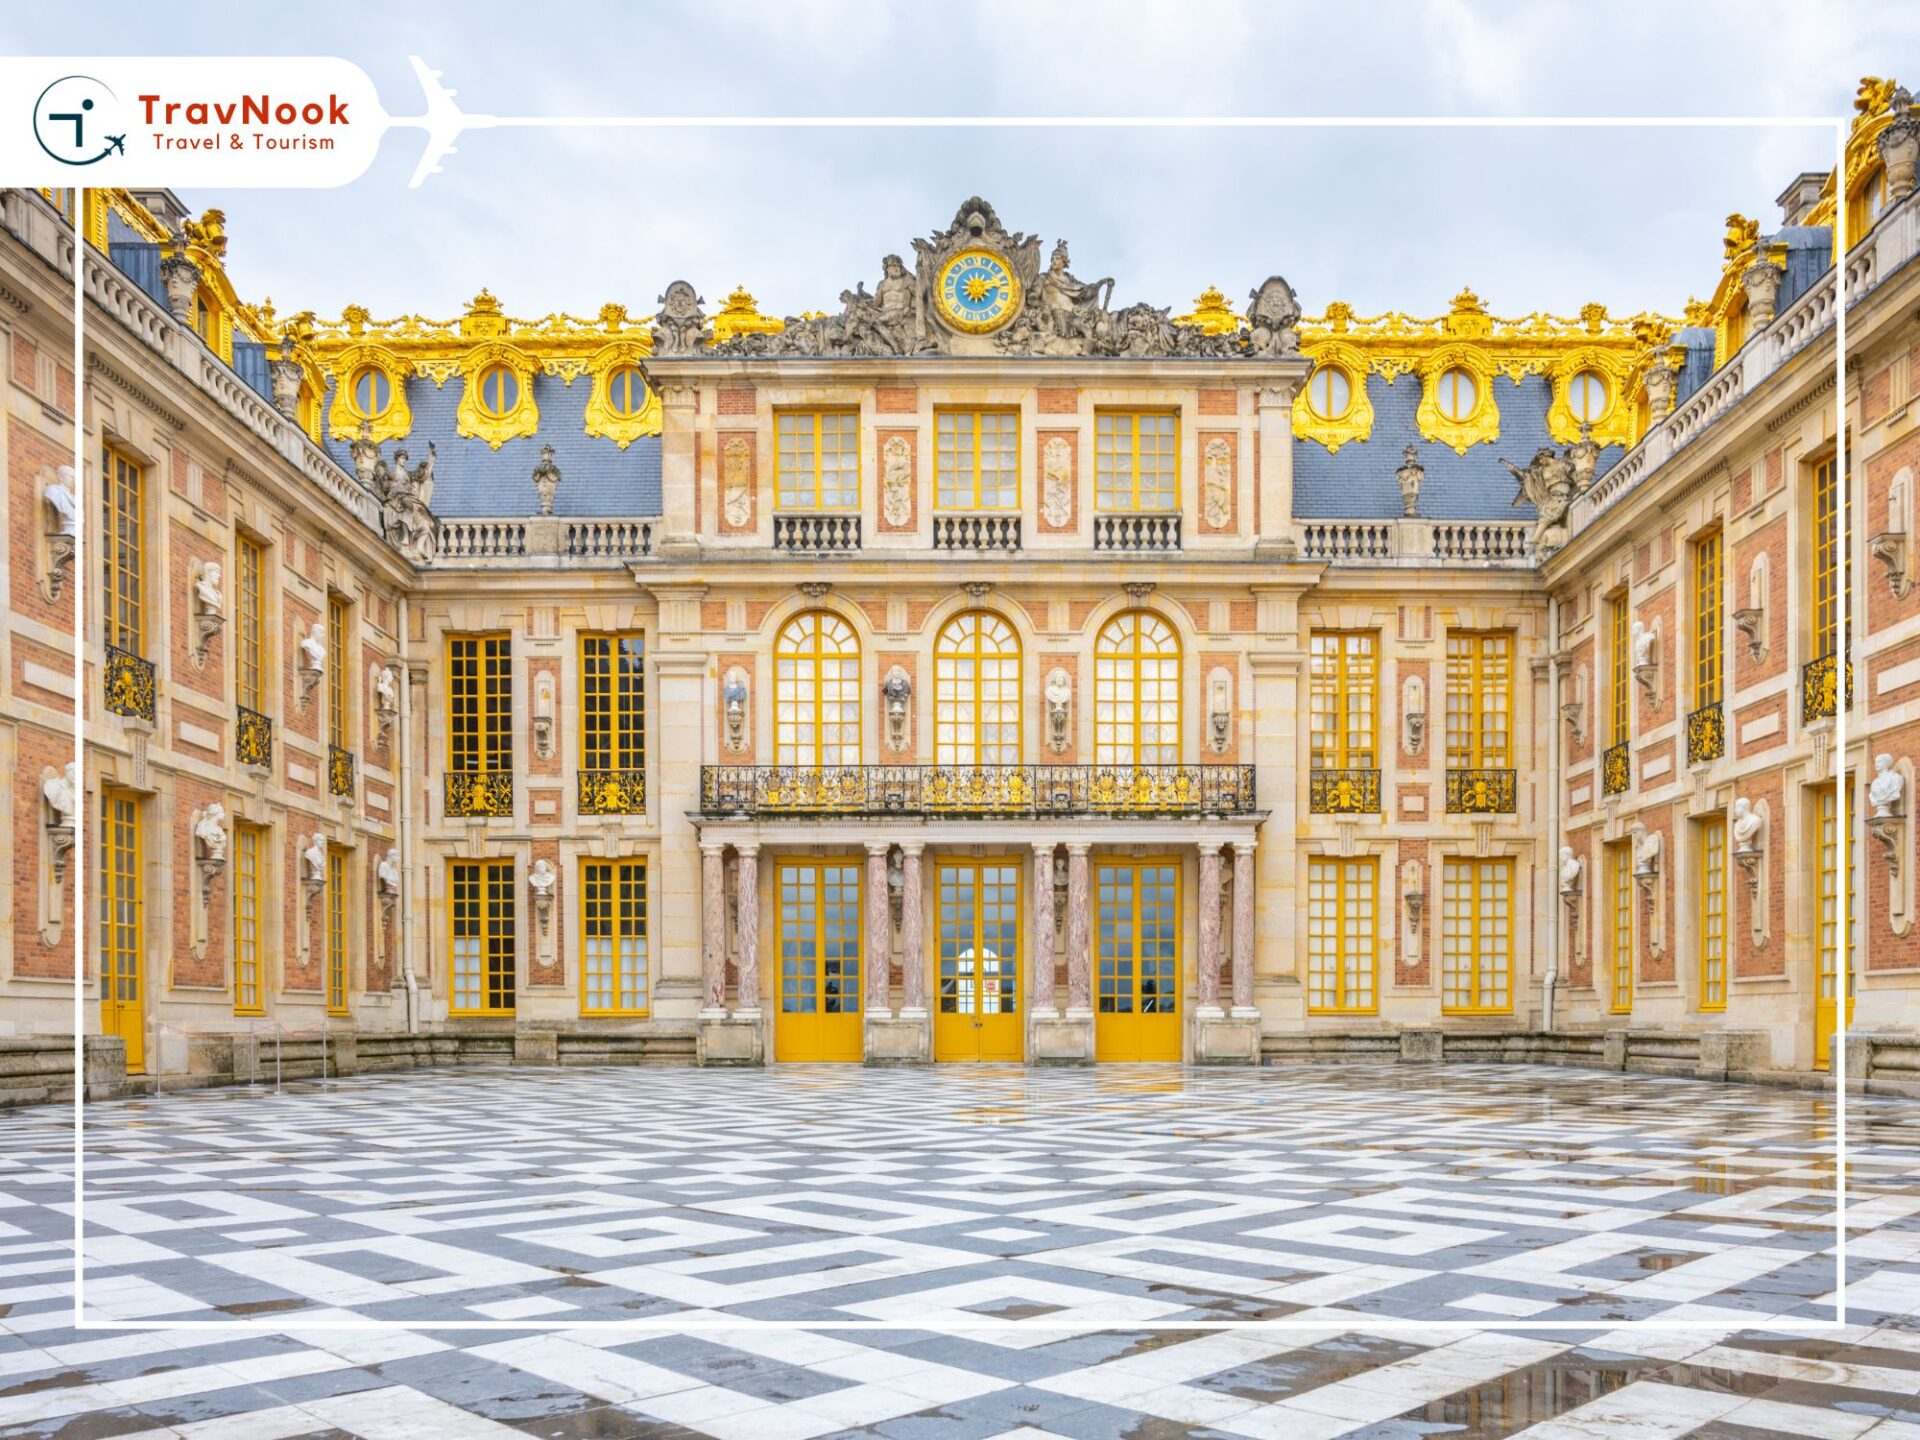 Famous Landmarks in France to Visit From UAE - Palace of Versailles, Versailles